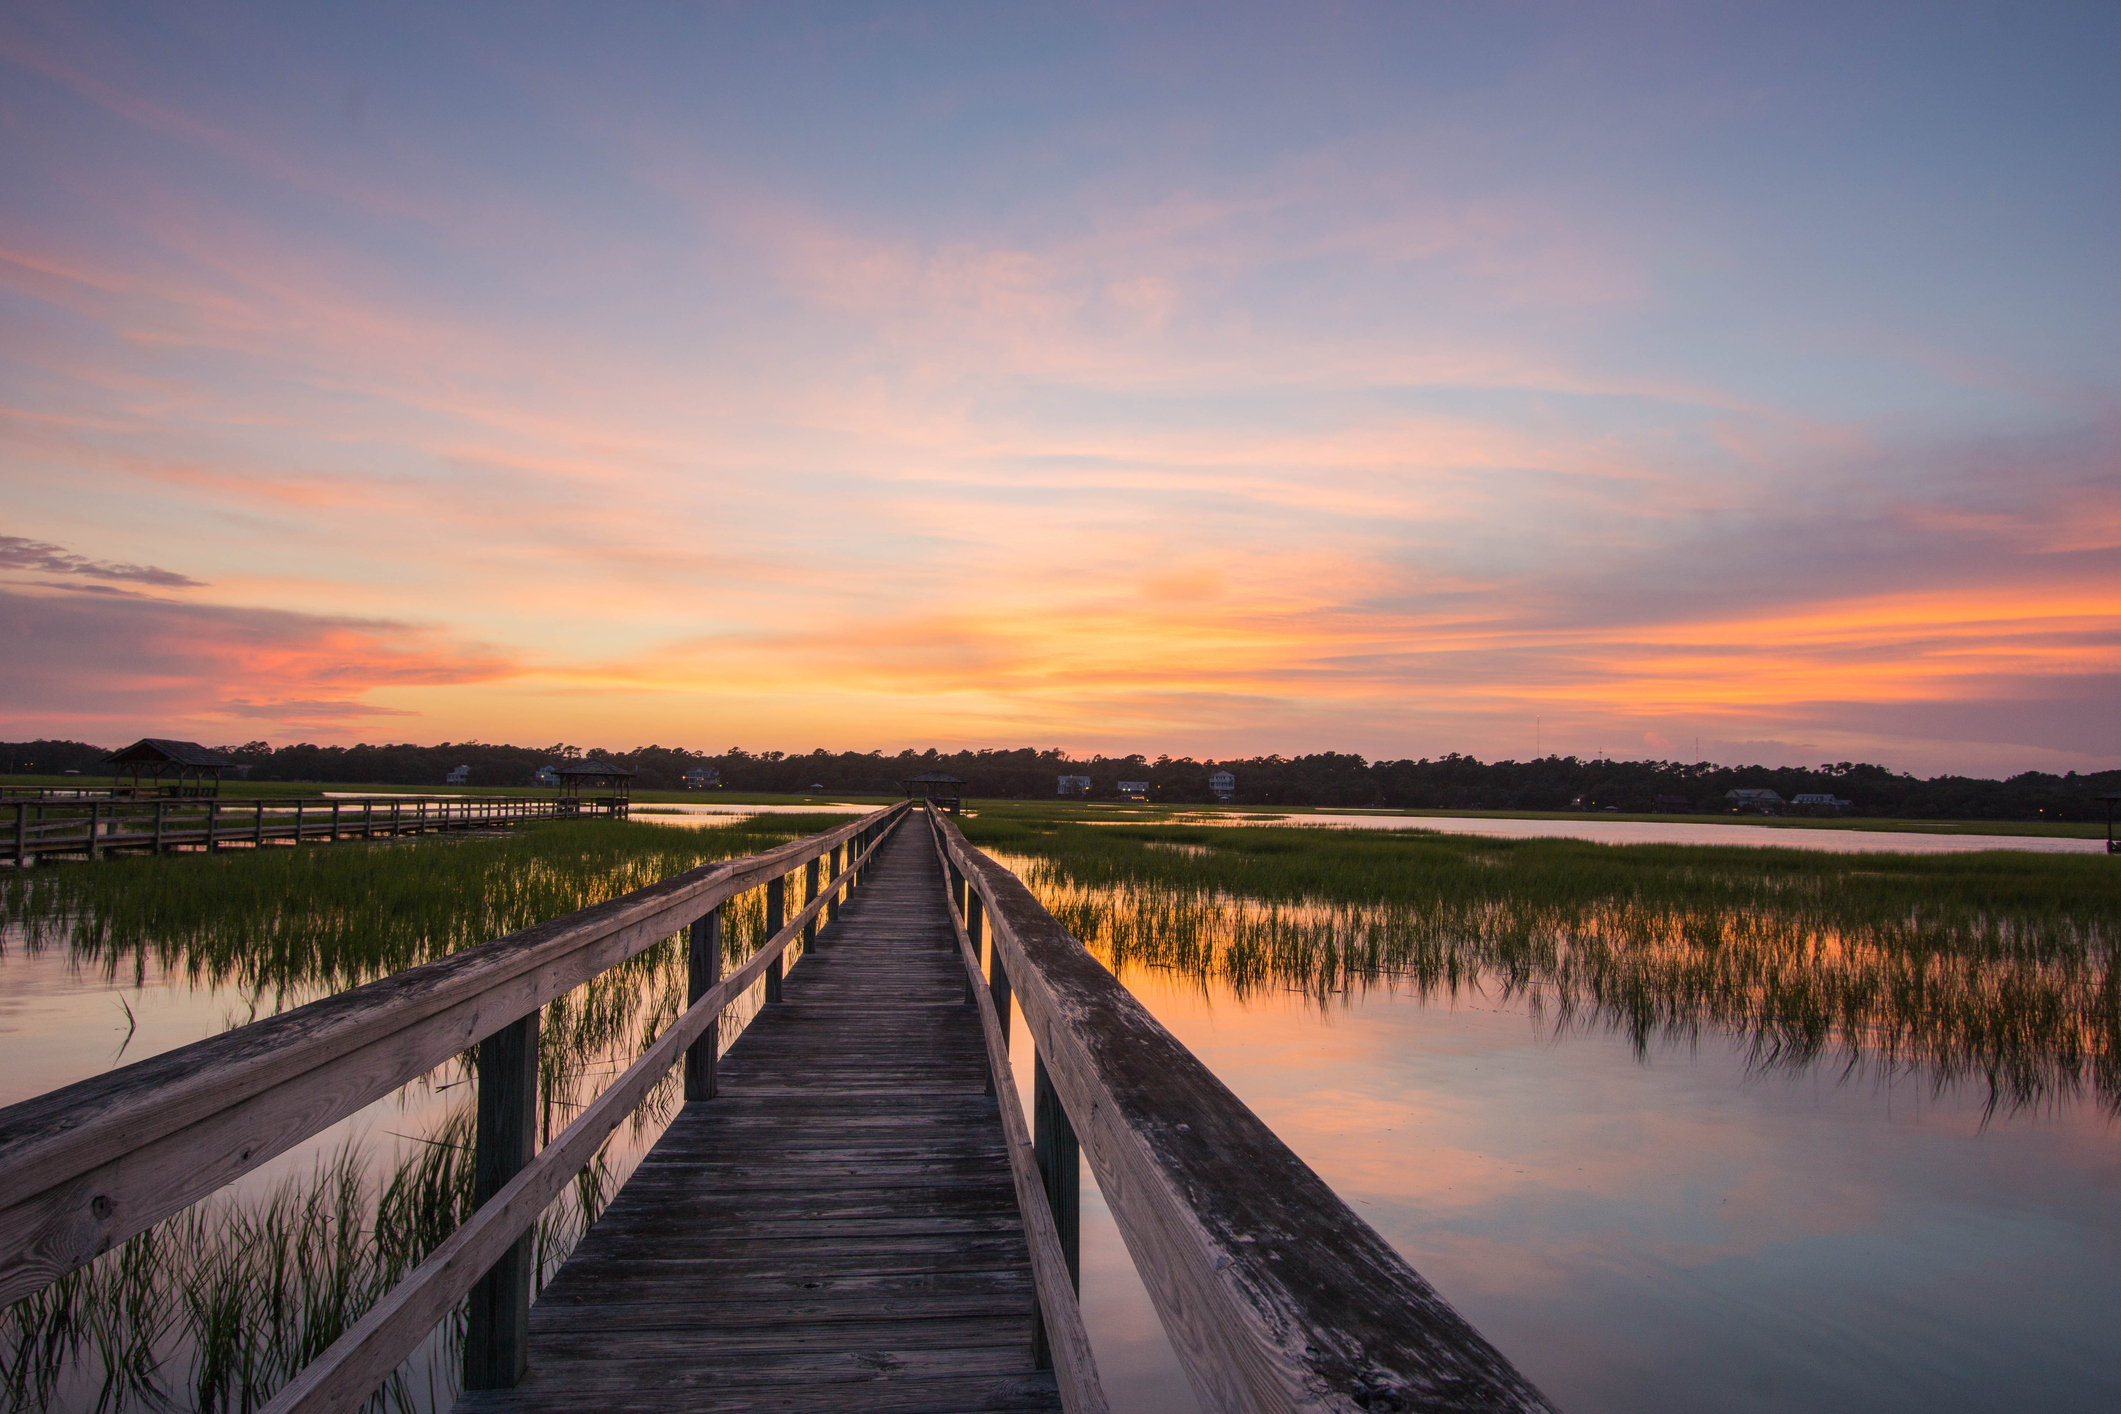 10 Things to Do in Pawleys Island in August